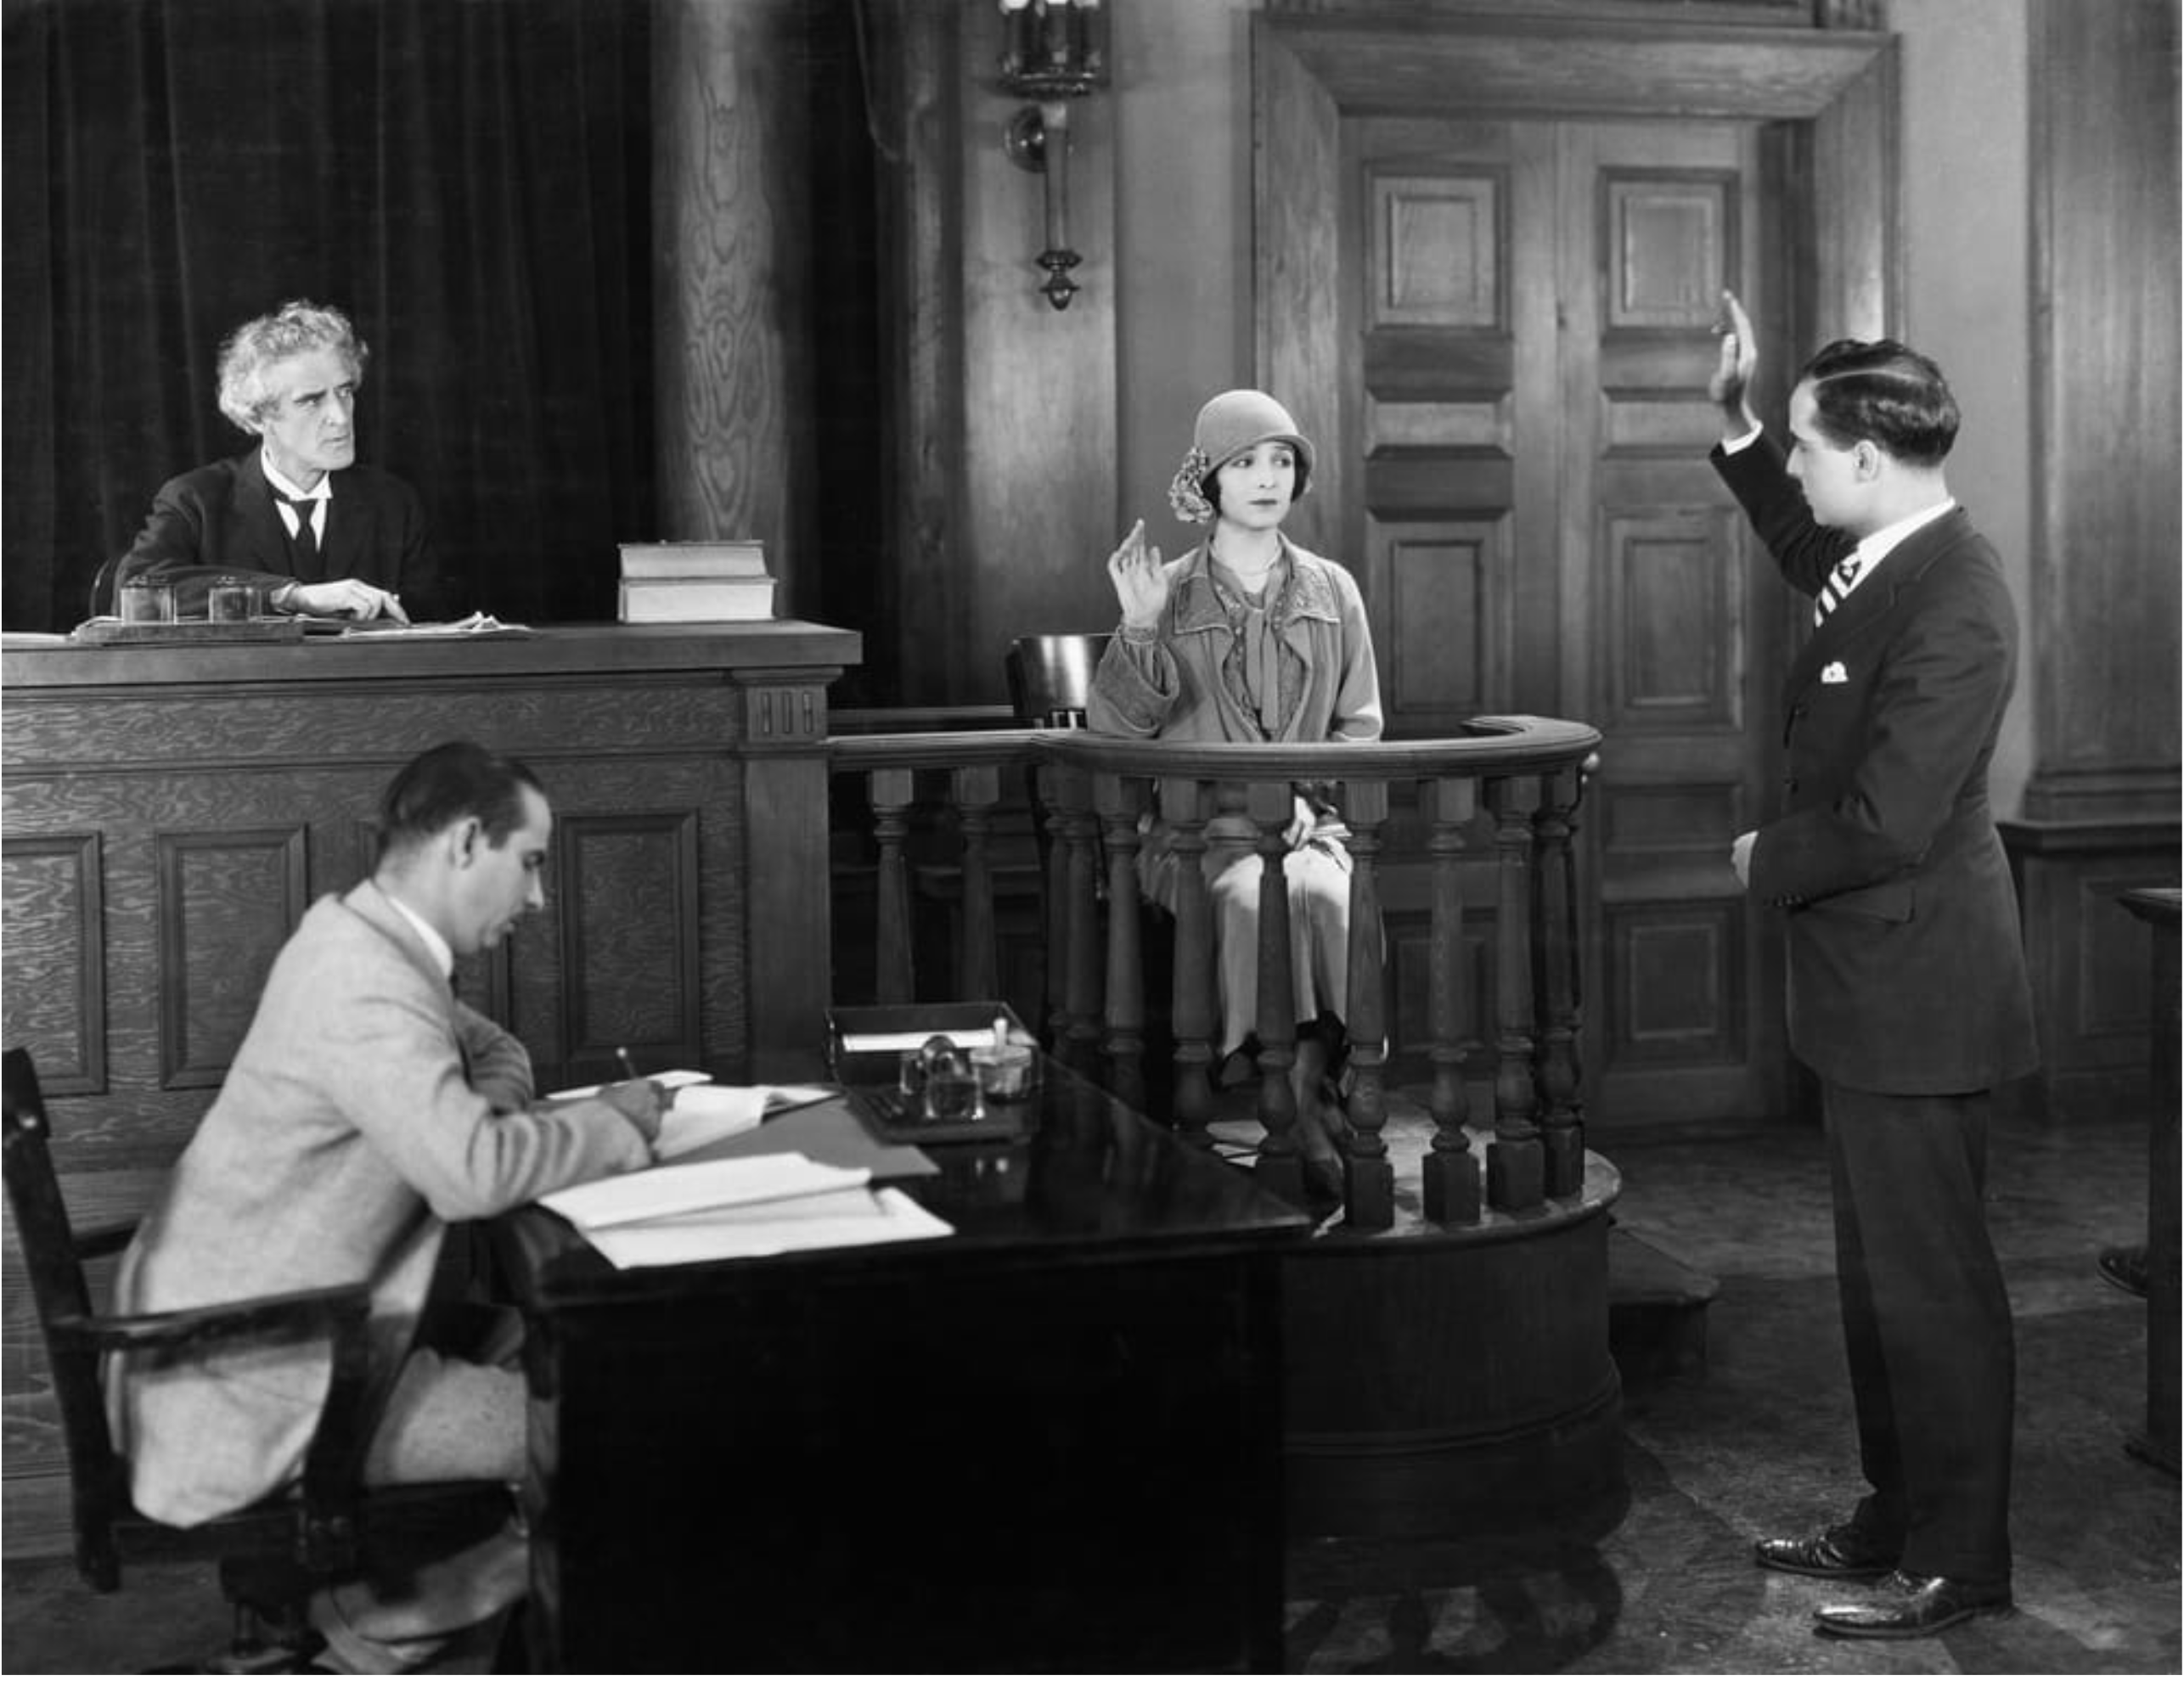 Black and white photo of an old criminal trial where a woman is being sworn in as a witness by the lawyer as the judge looks on and the court reporter writes what is being said.